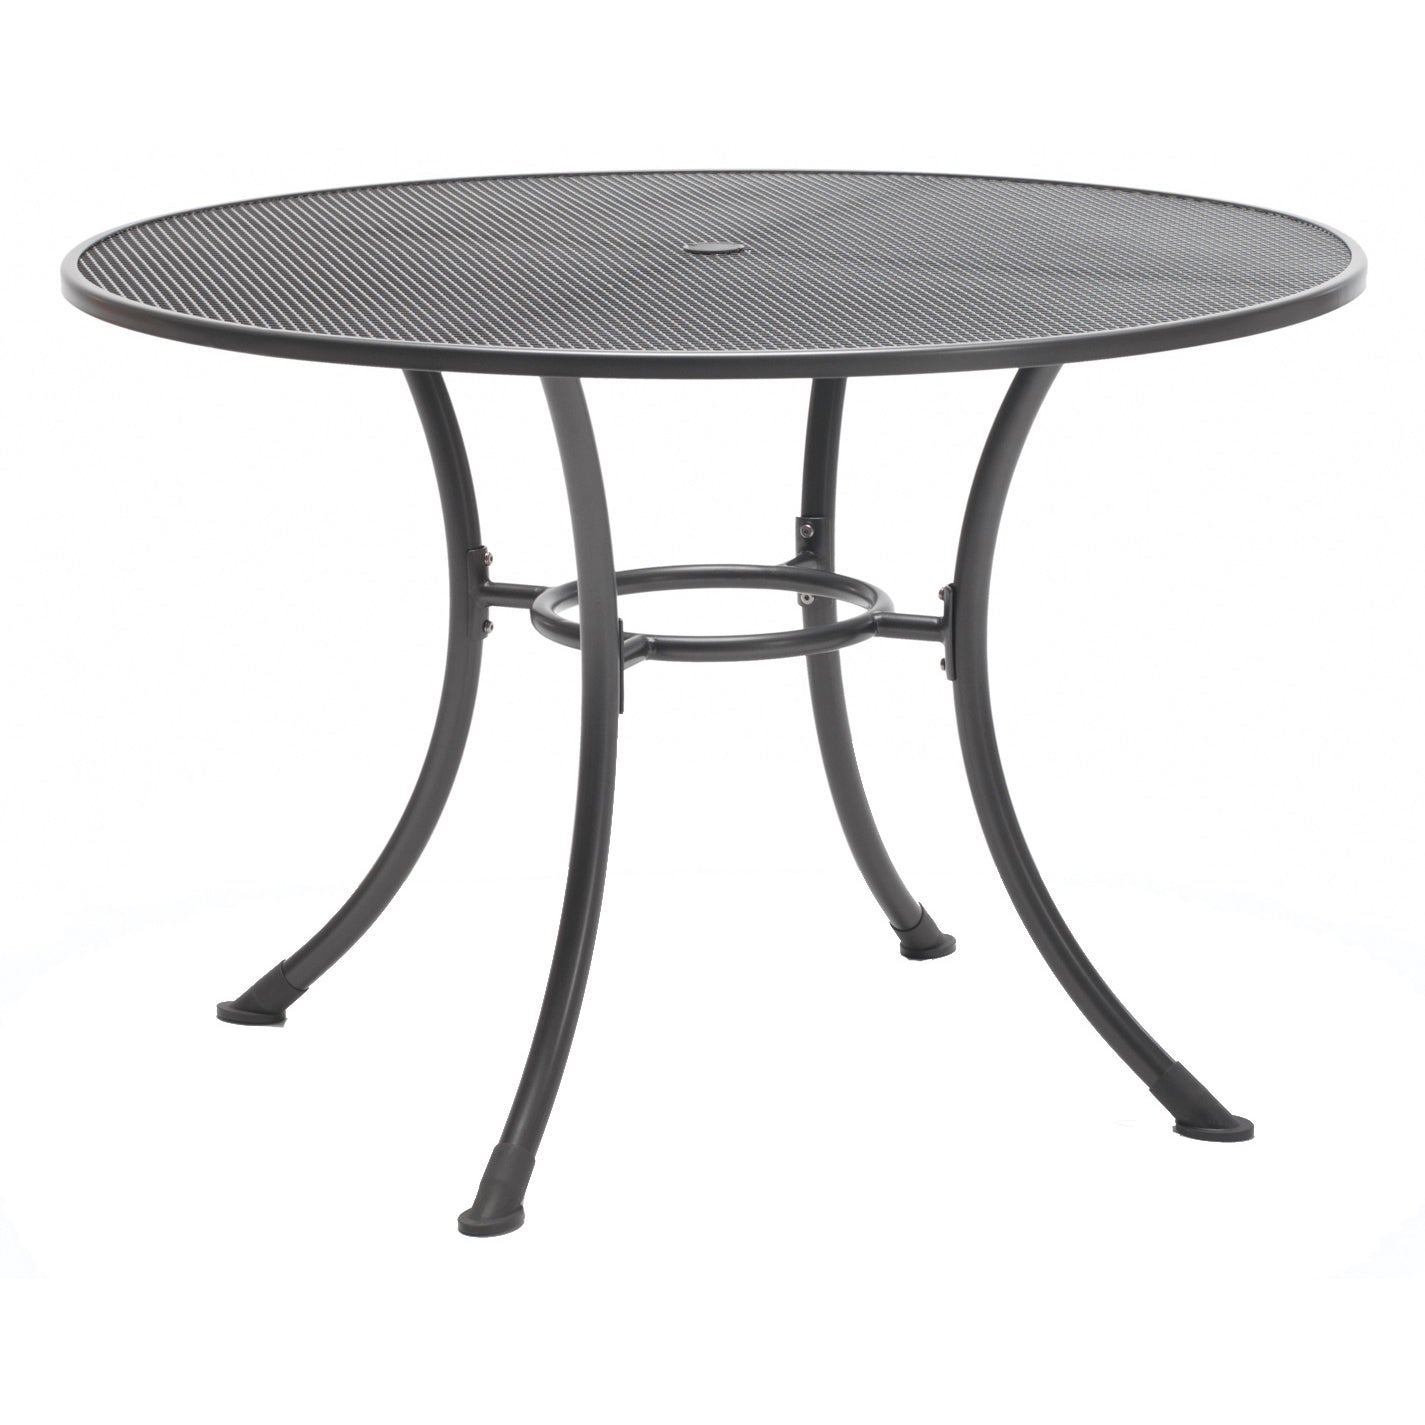 42" Round Mesh Top Table